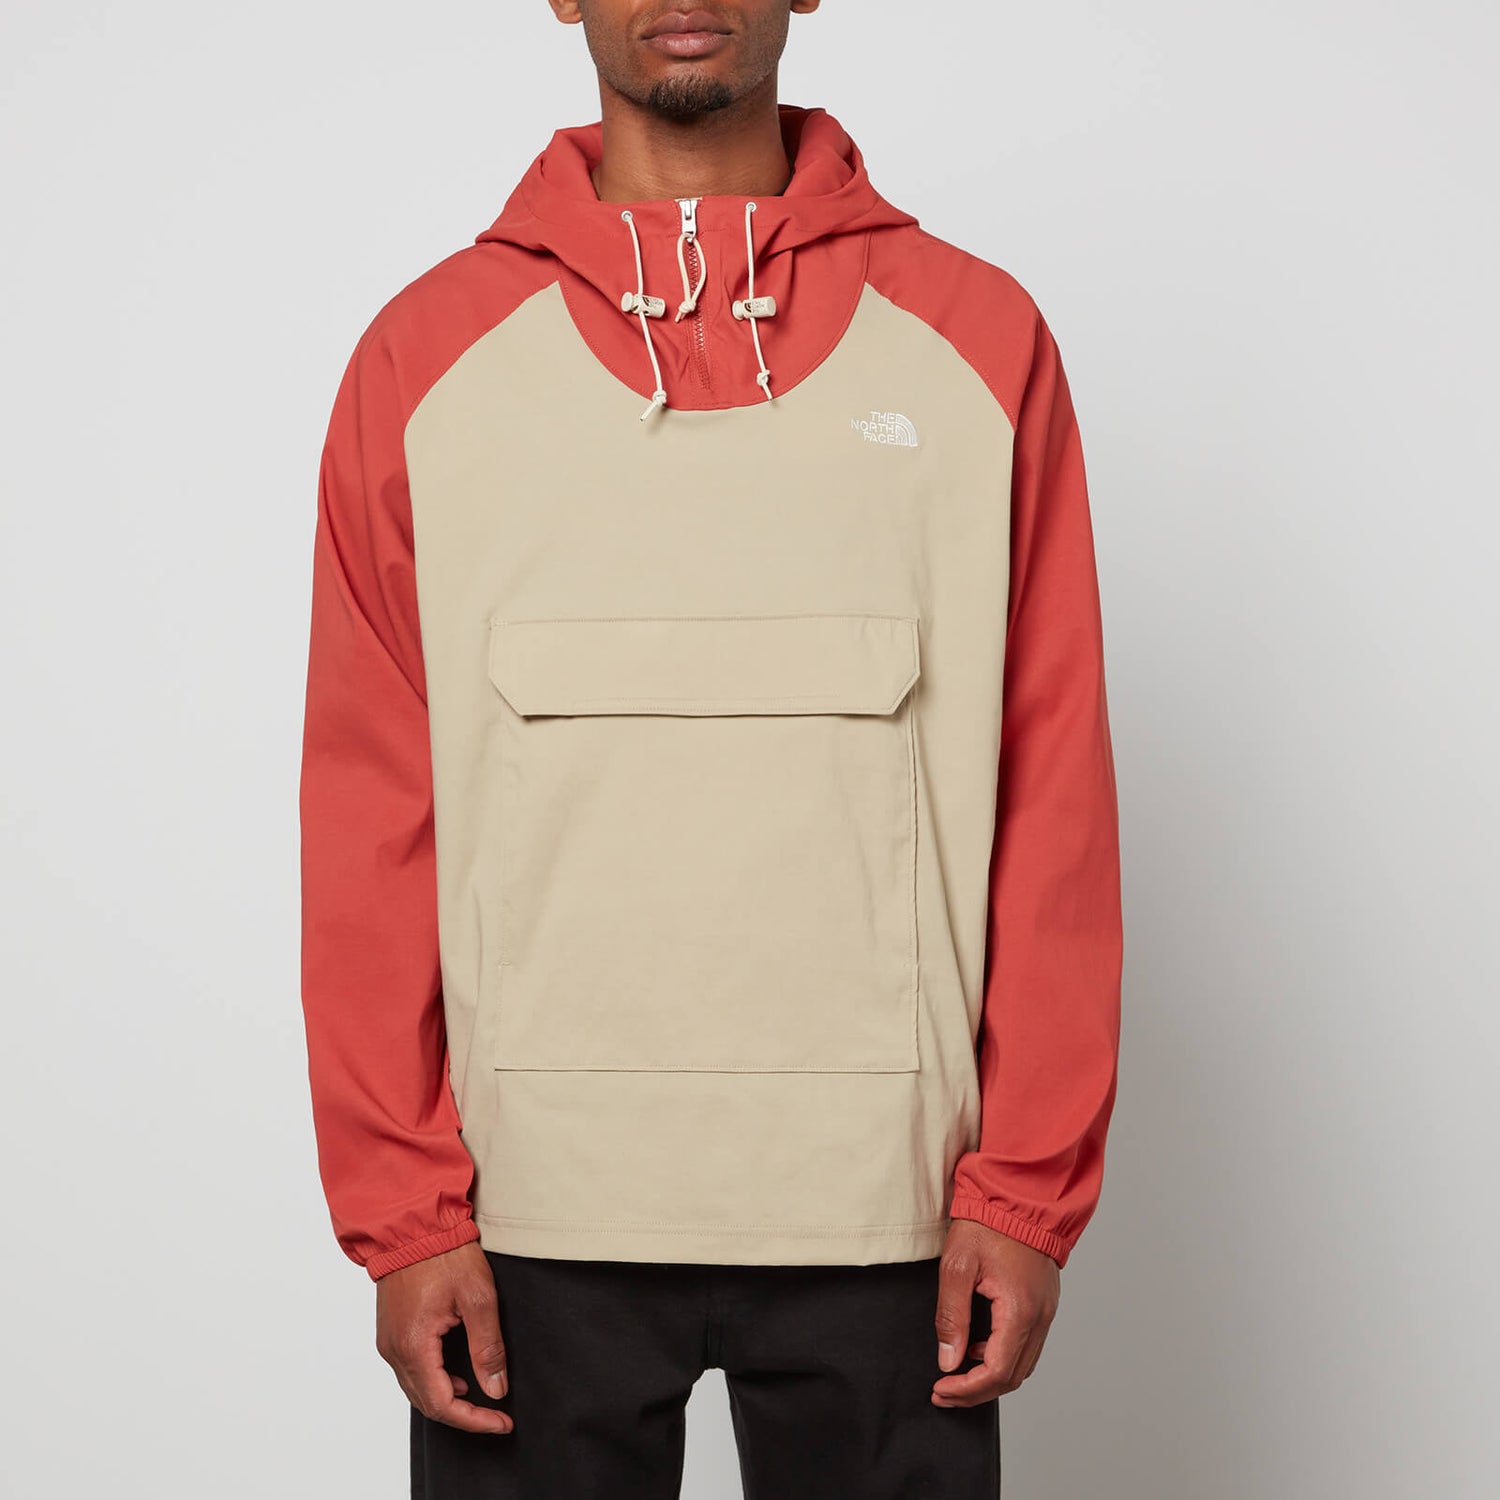 The North Face Men's Class V Pullover Hooded Anorak - Tandori Spice/Beige - S